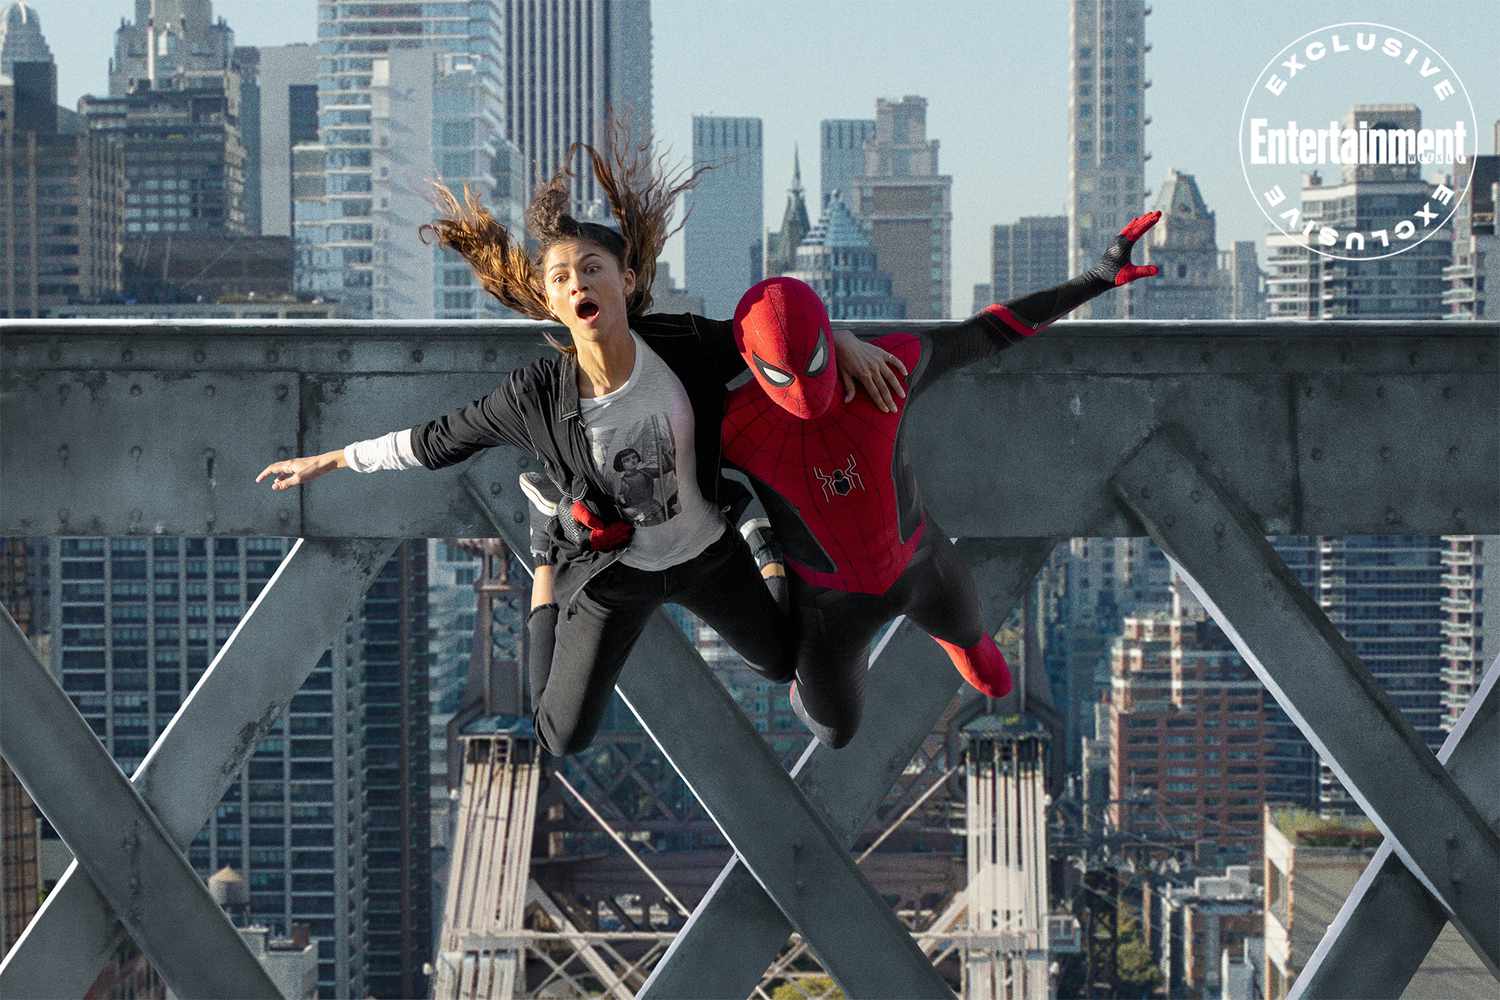 Zendaya as MJ (left) and Tom Holland as Spider-Man (right) in 'Spider-Man: No Way Home'